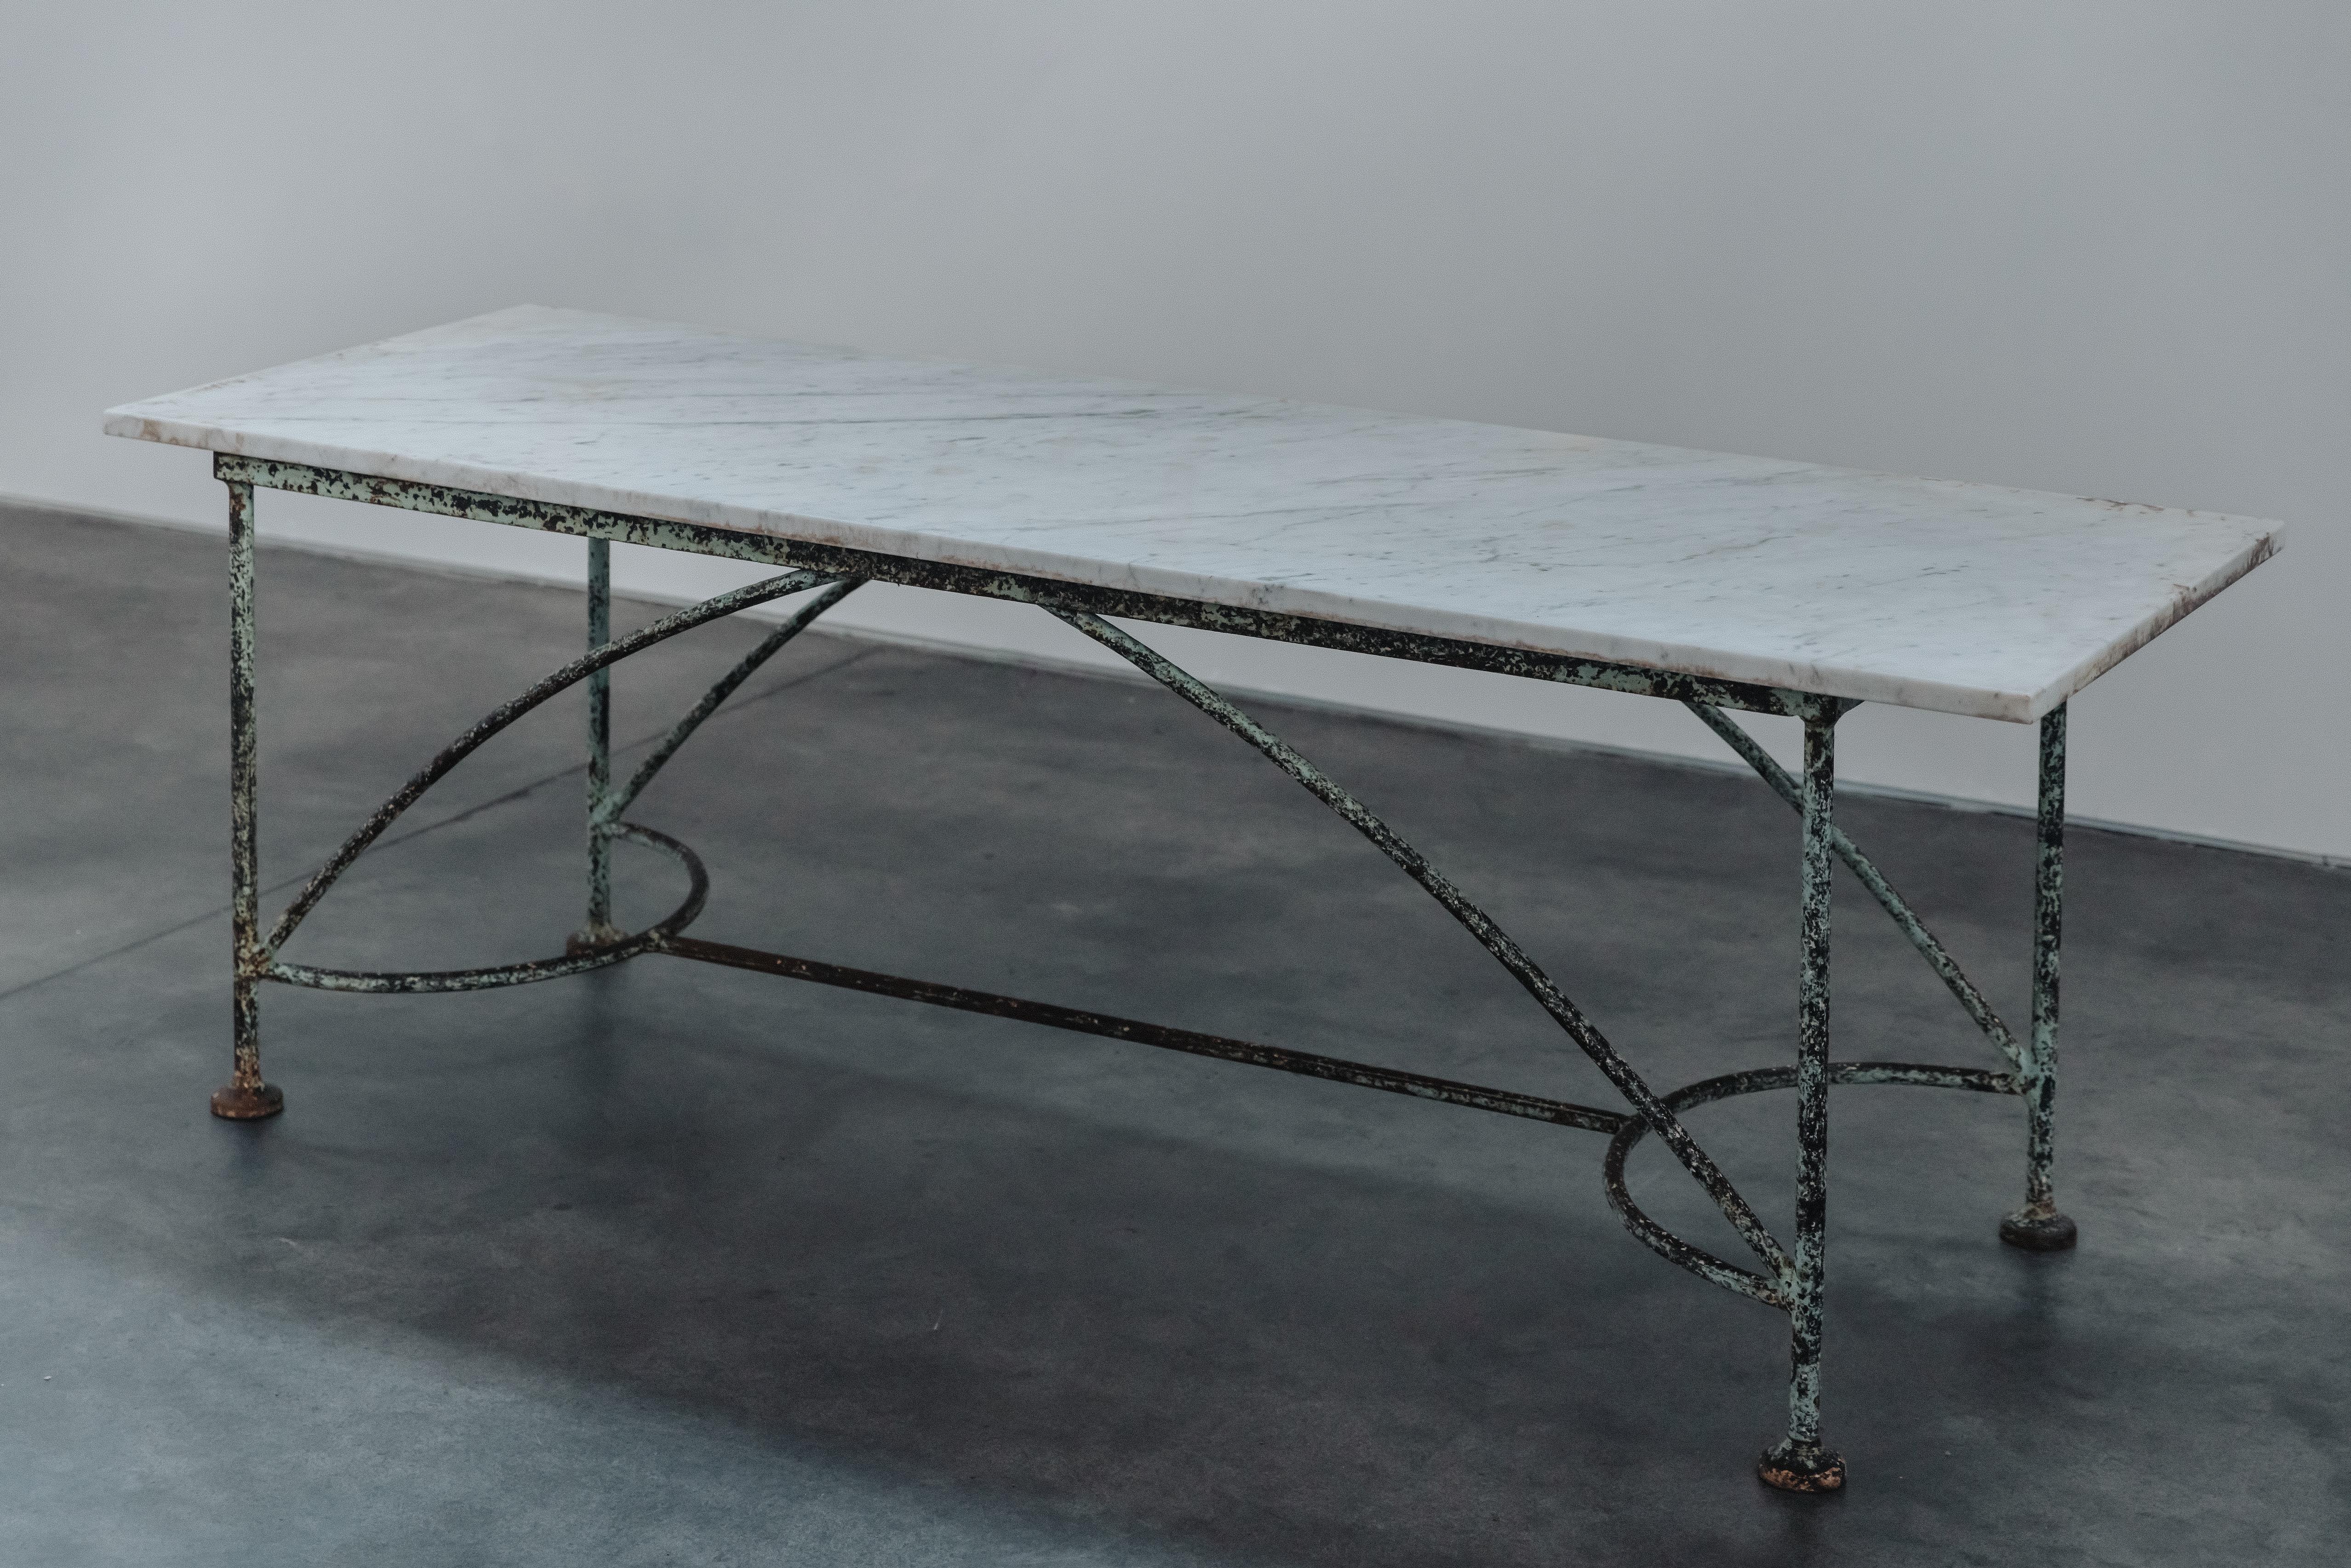 Large Vintage Iron and Marble Garden Table From France, Circa 1920.  Solid iron base with fantastic original color and patina.  Marble rests on iron base.